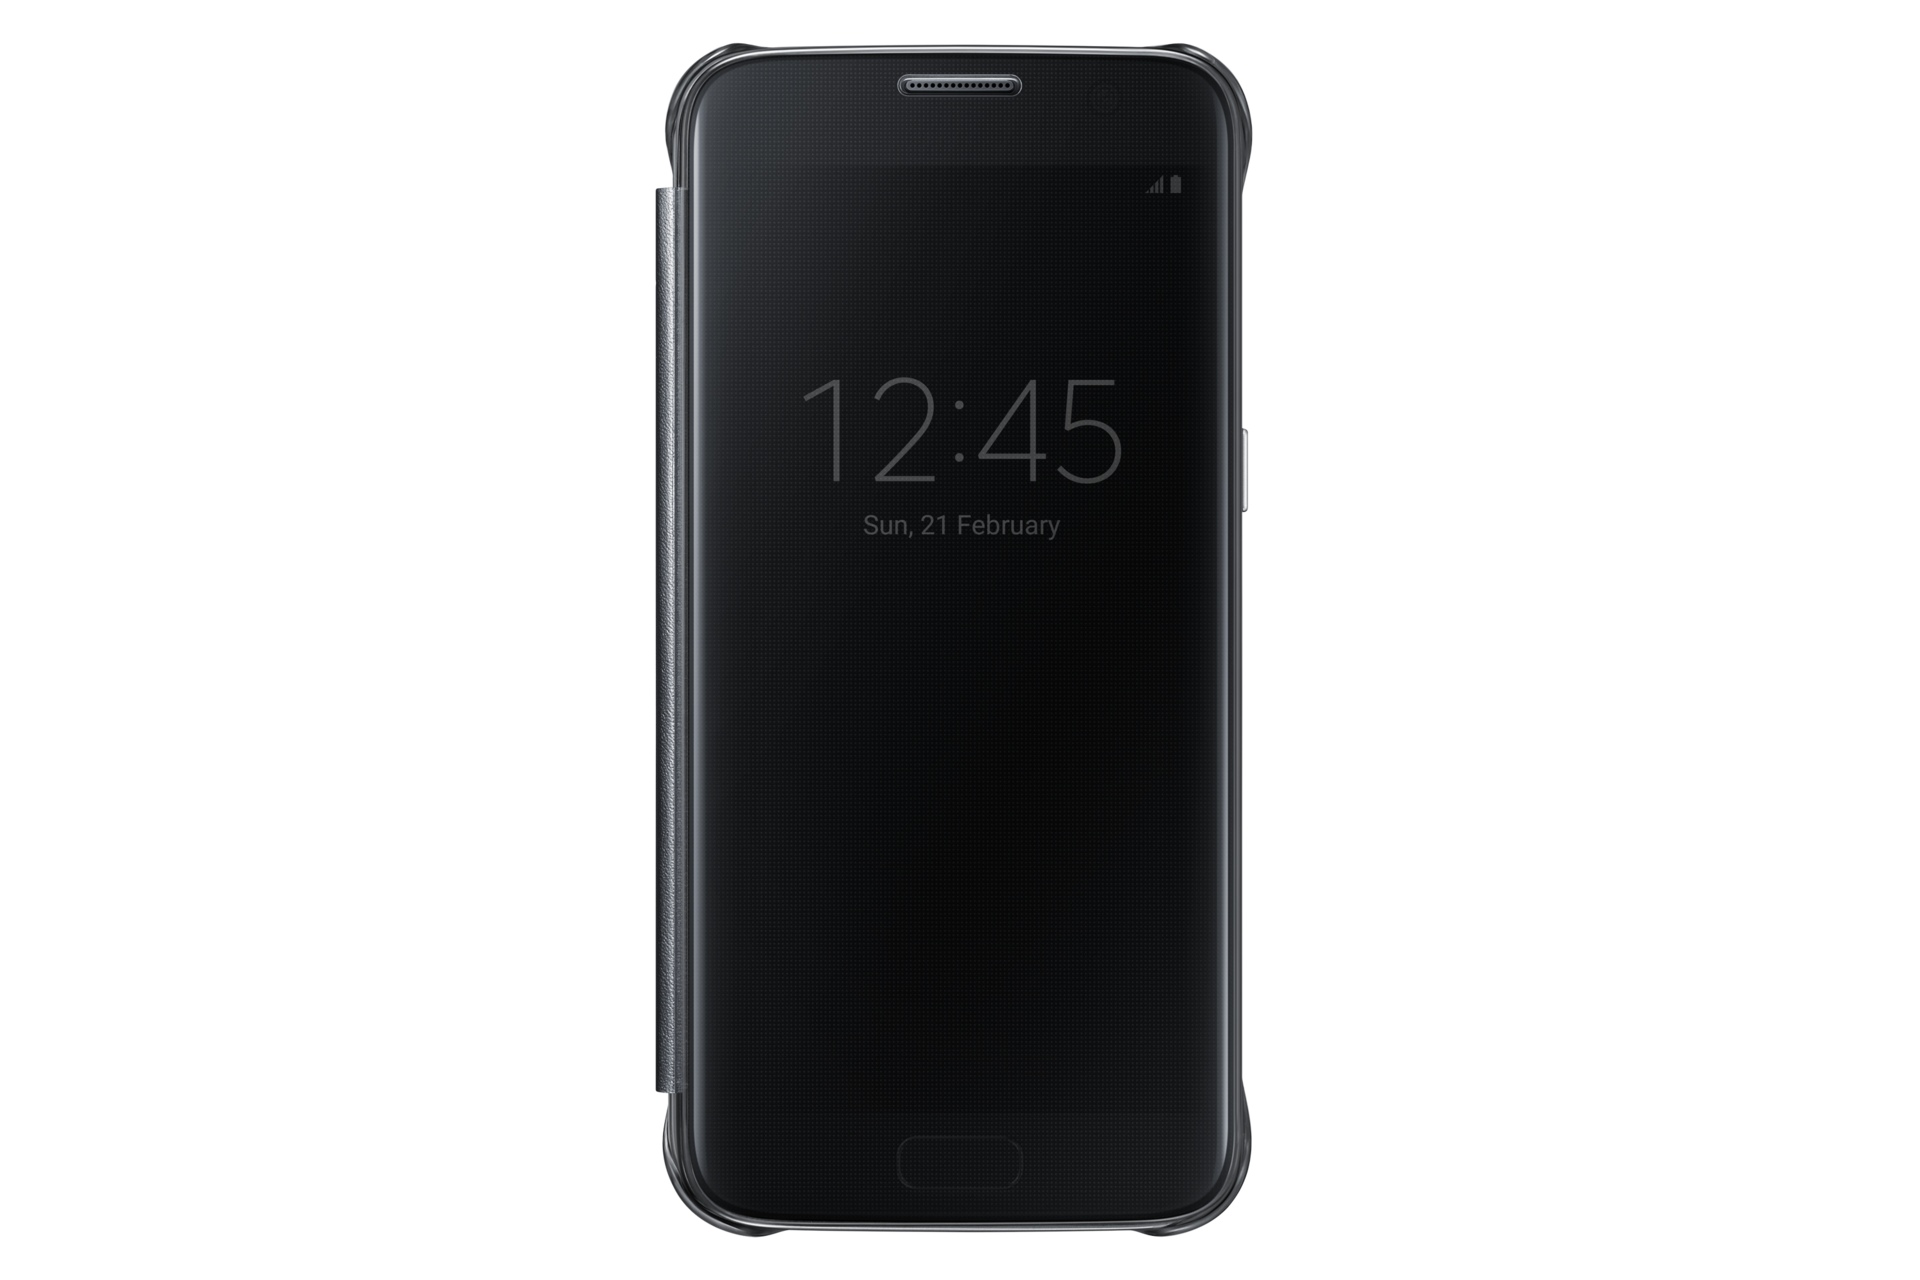 Moreel onderwijs amateur Madeliefje Clear View Cover (Galaxy S7) | Samsung Support Caribbean